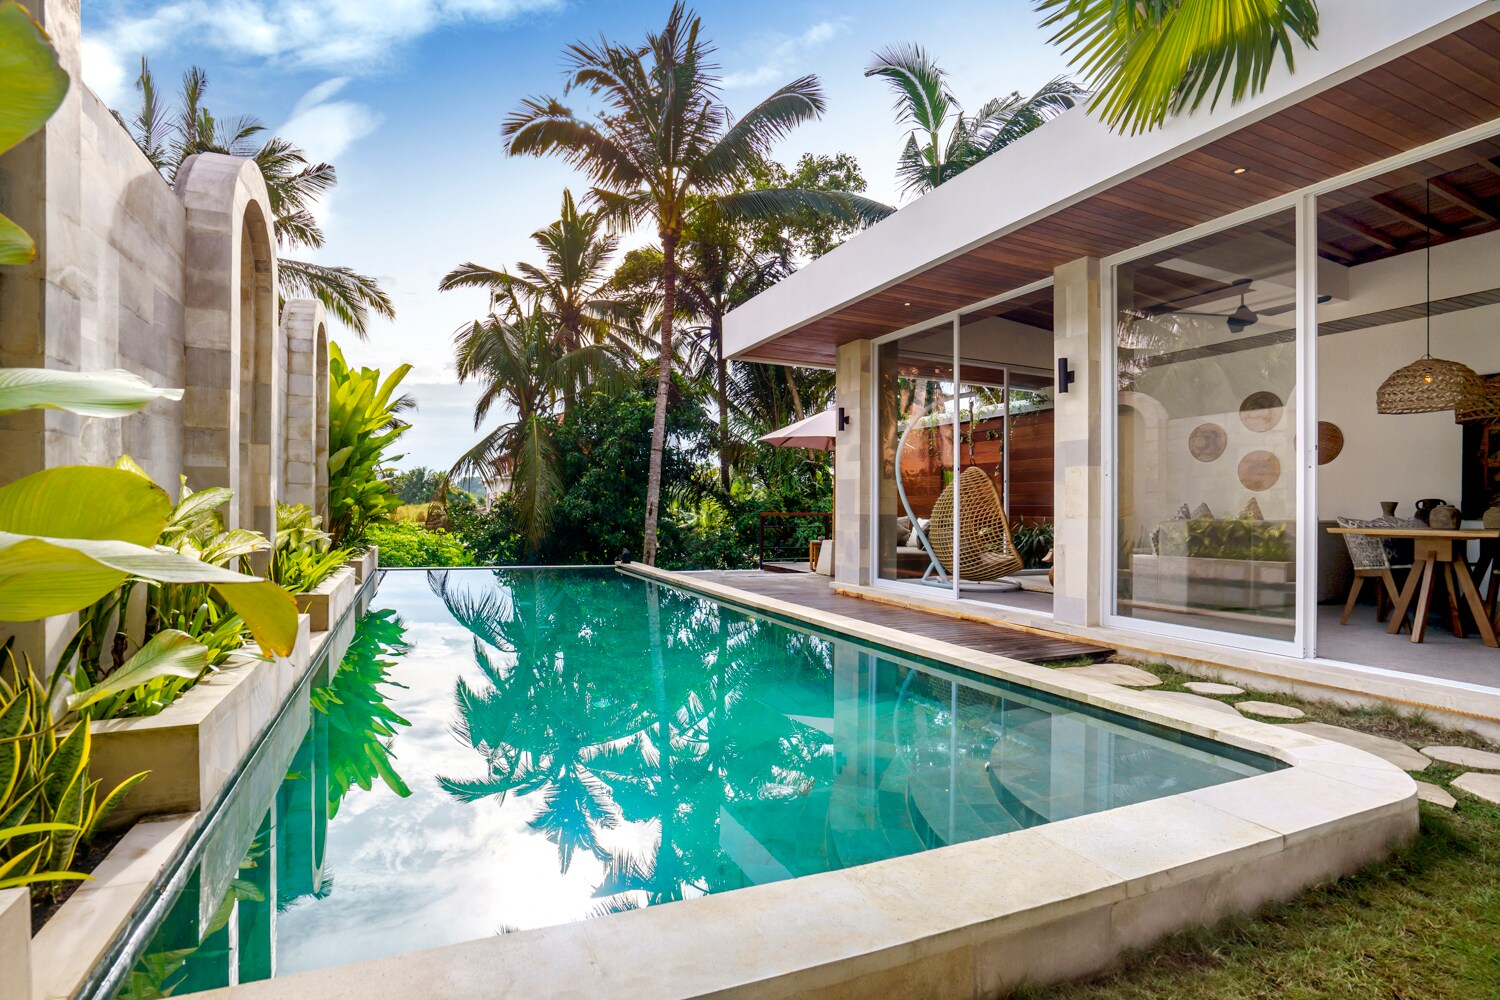 Property Image 1 - 2 Bedroom pool villa with nature view, heart of Ubud